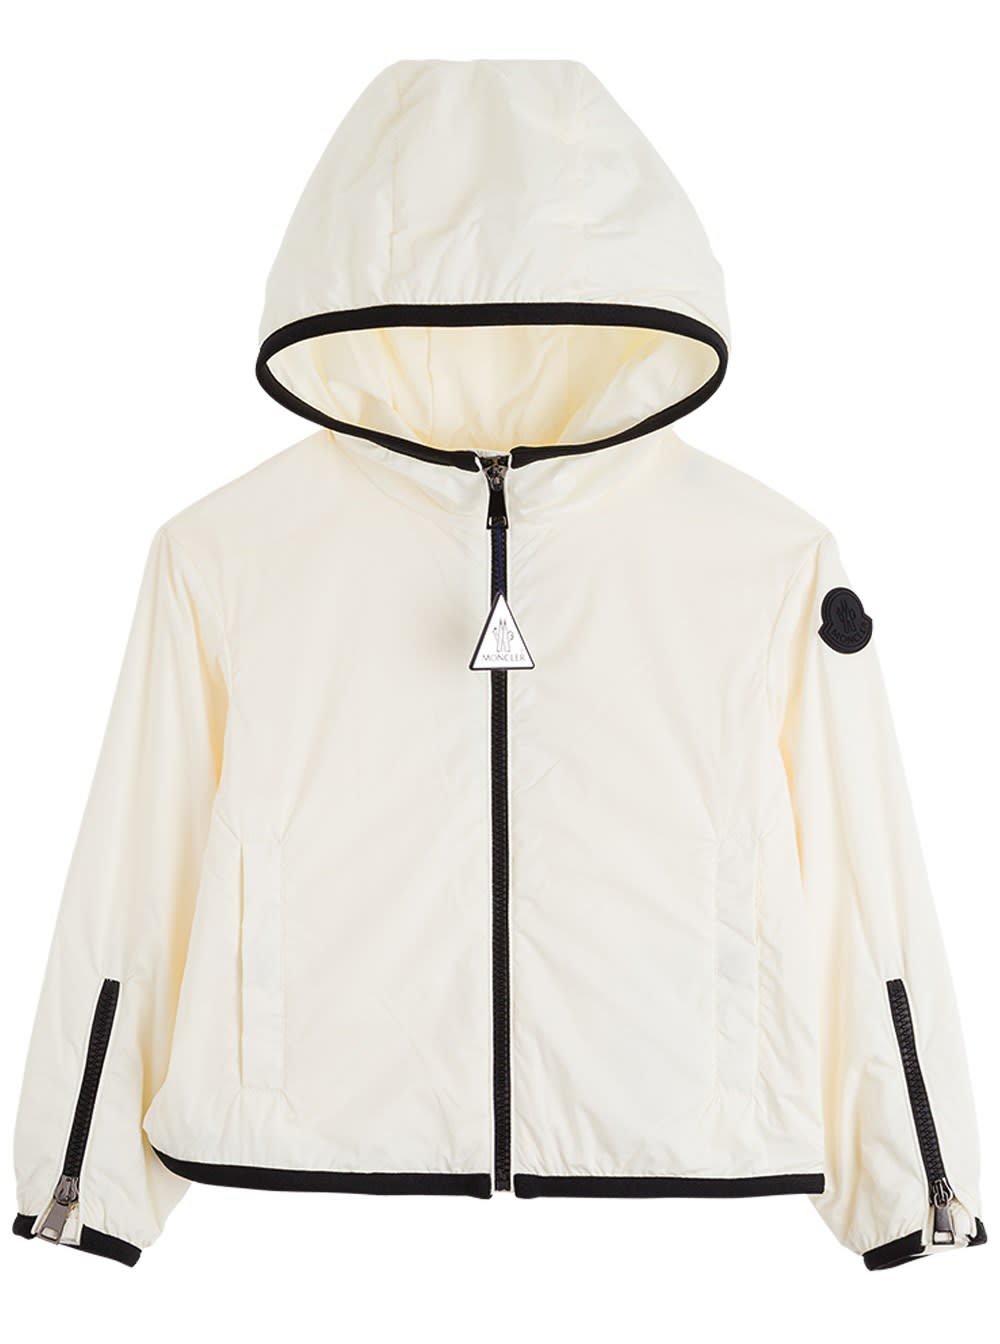 Moncler Breanna Nylon Jacket With Contrasting Profiles